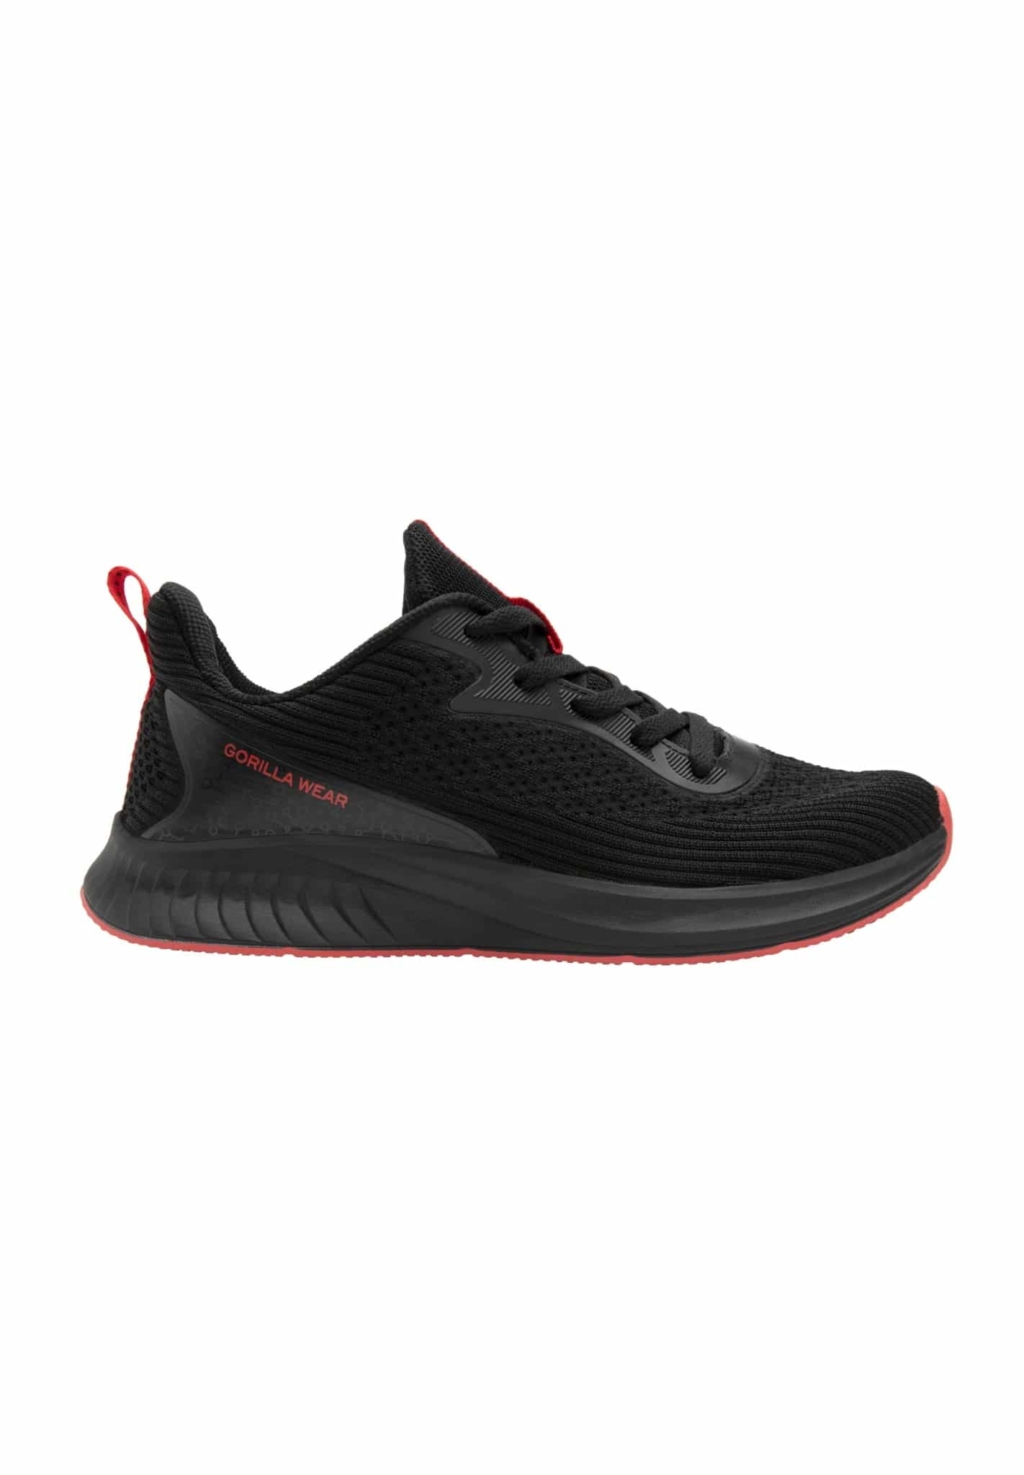 90014905 milton training shoes black red scaled